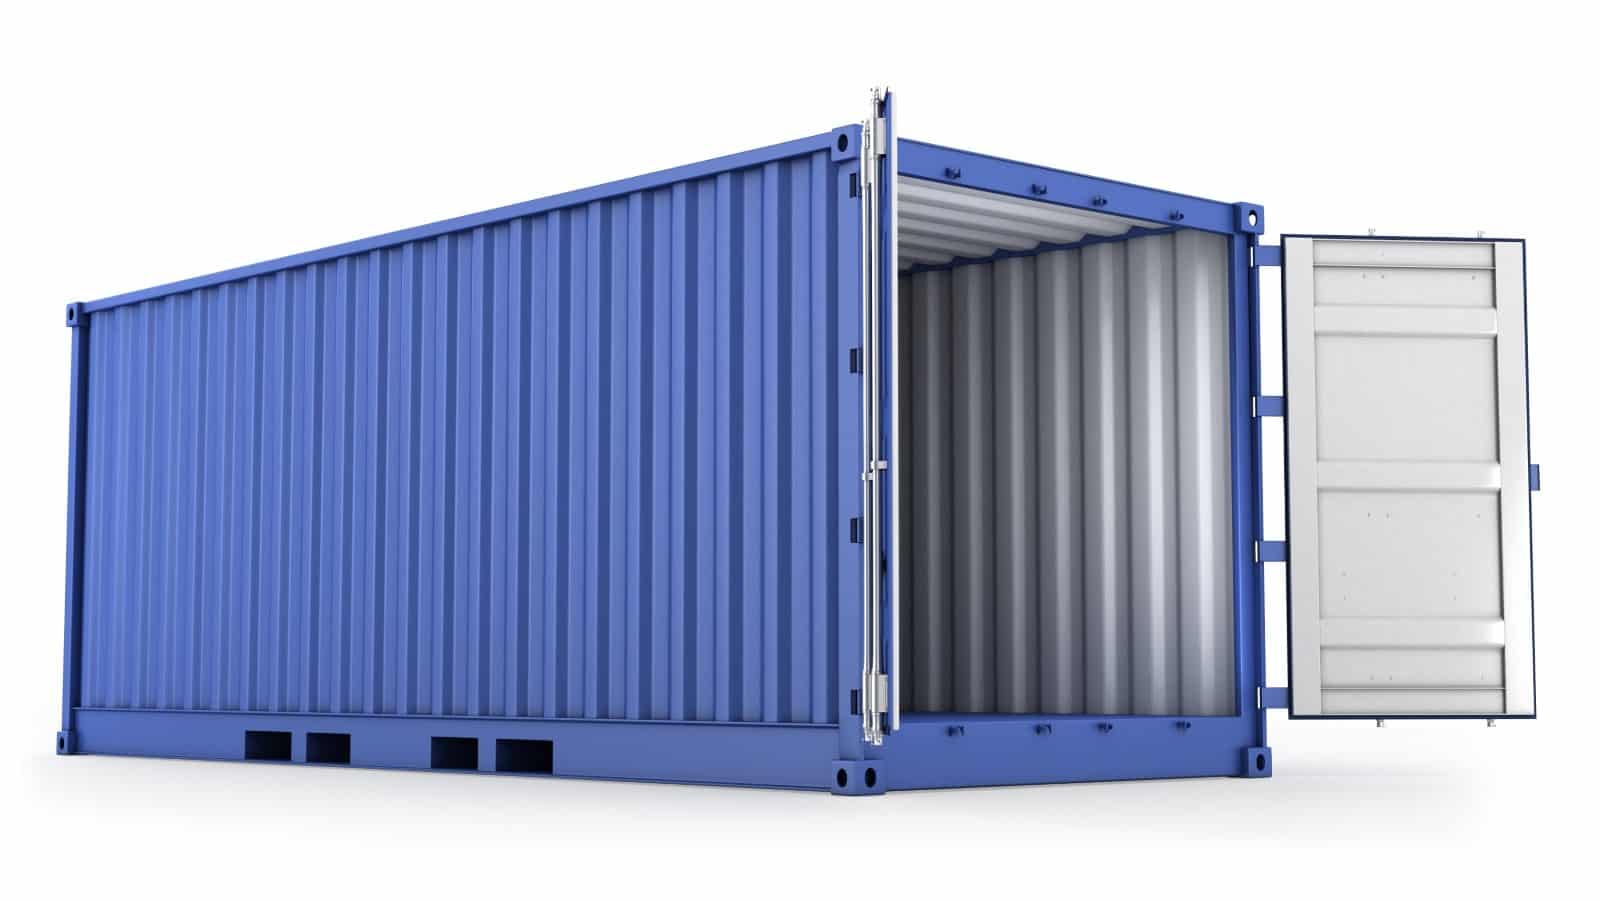 Shipping container, how to finish the inside of a shipping container